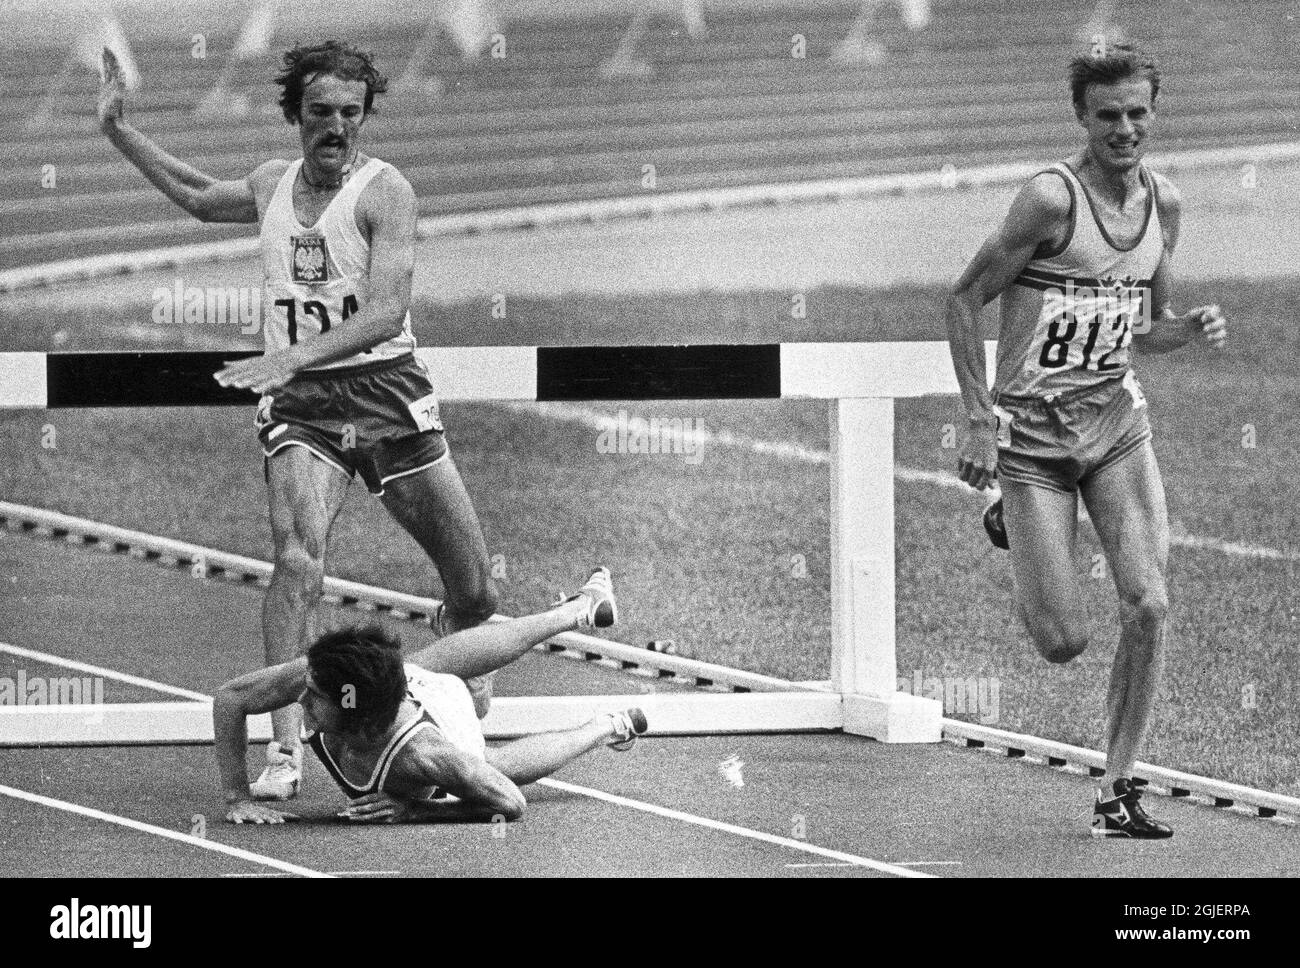 Anders Garderud sprinting for the gold medal in 3000 meter steeplechase at the Olympic Games in Montreal 1976. Baumgartl from East Germany has just fallen over the last hurdle and Malinowski from Poland takes a jump over him running for silver. Stock Photo